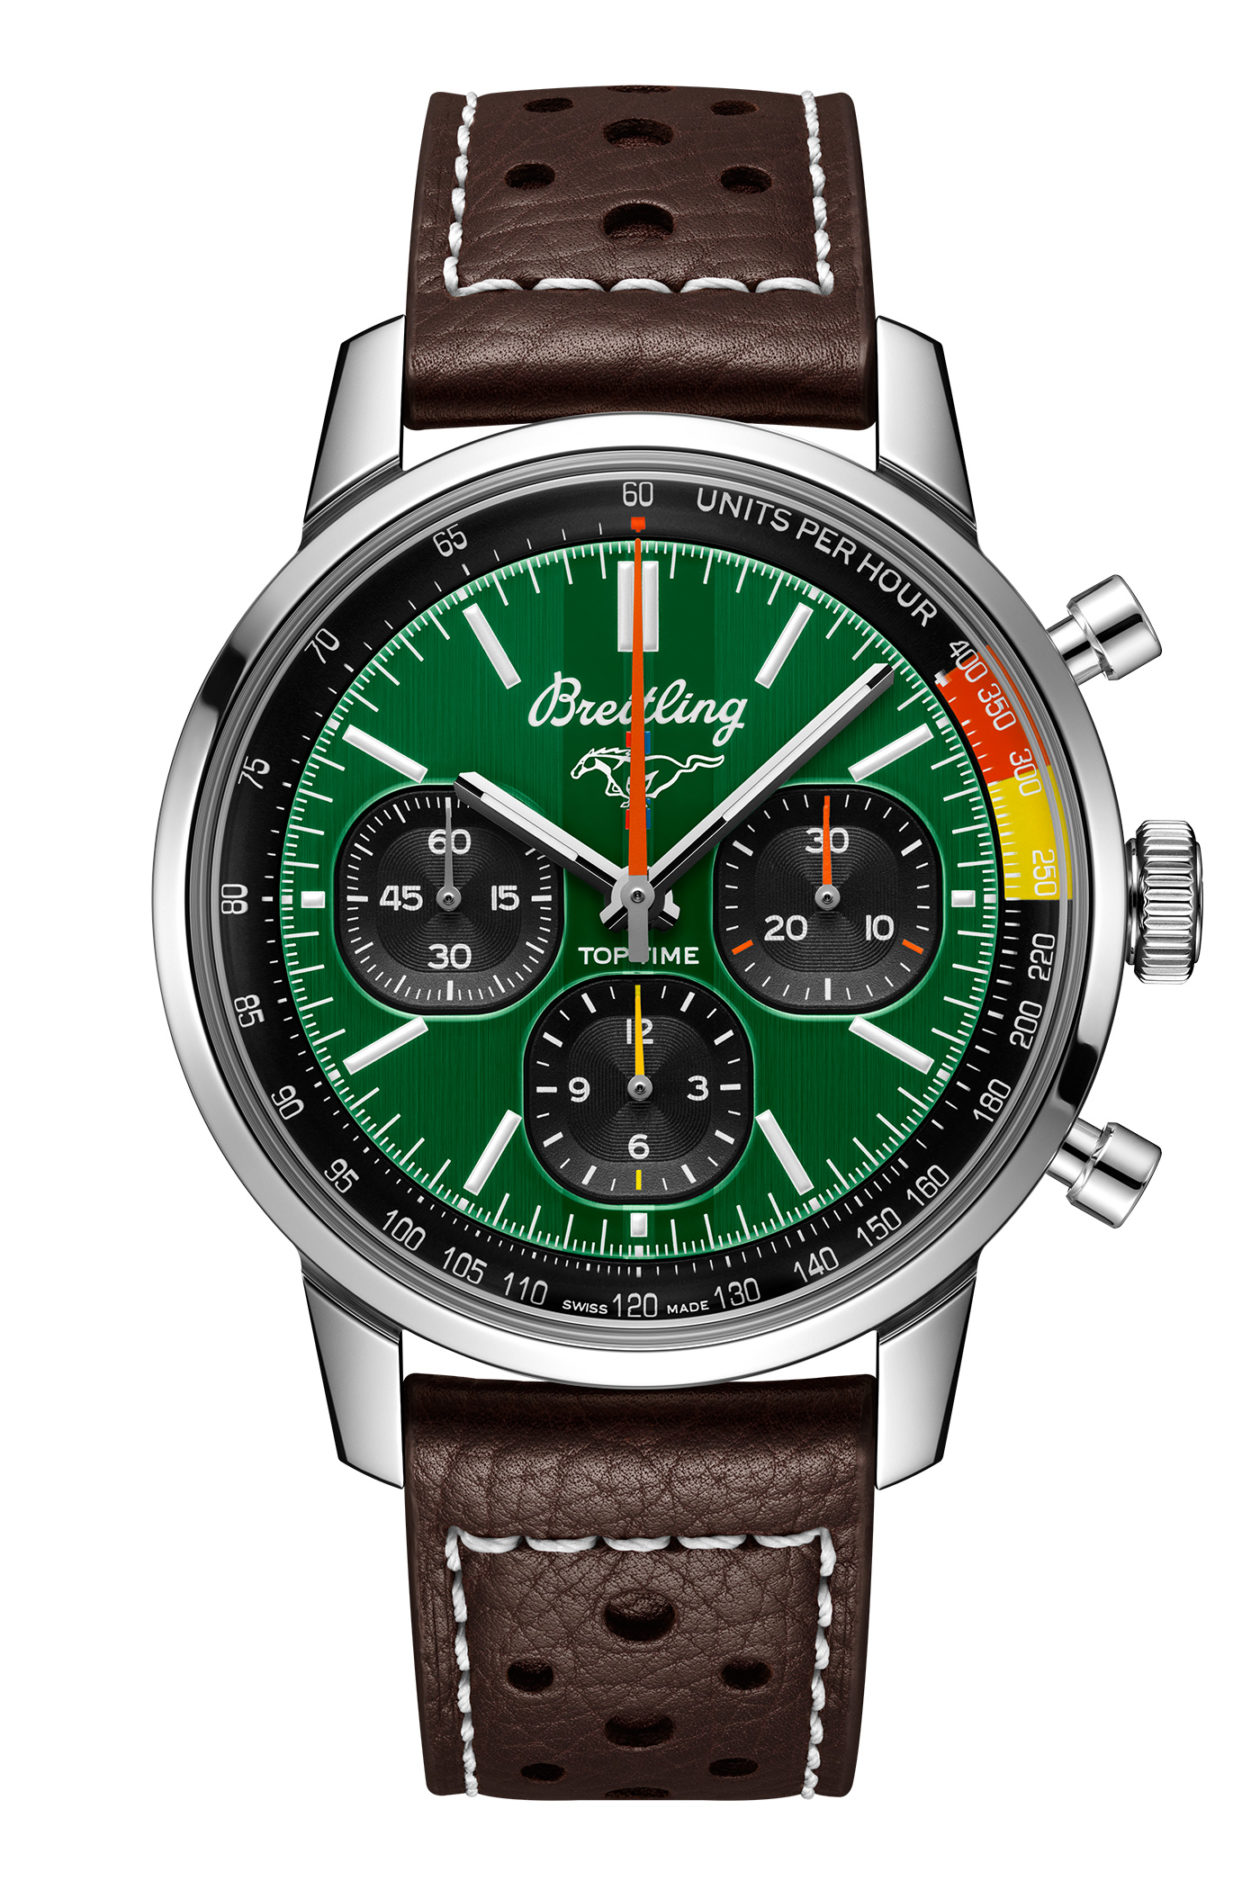 Breitling Top Time B01 "Mustang"